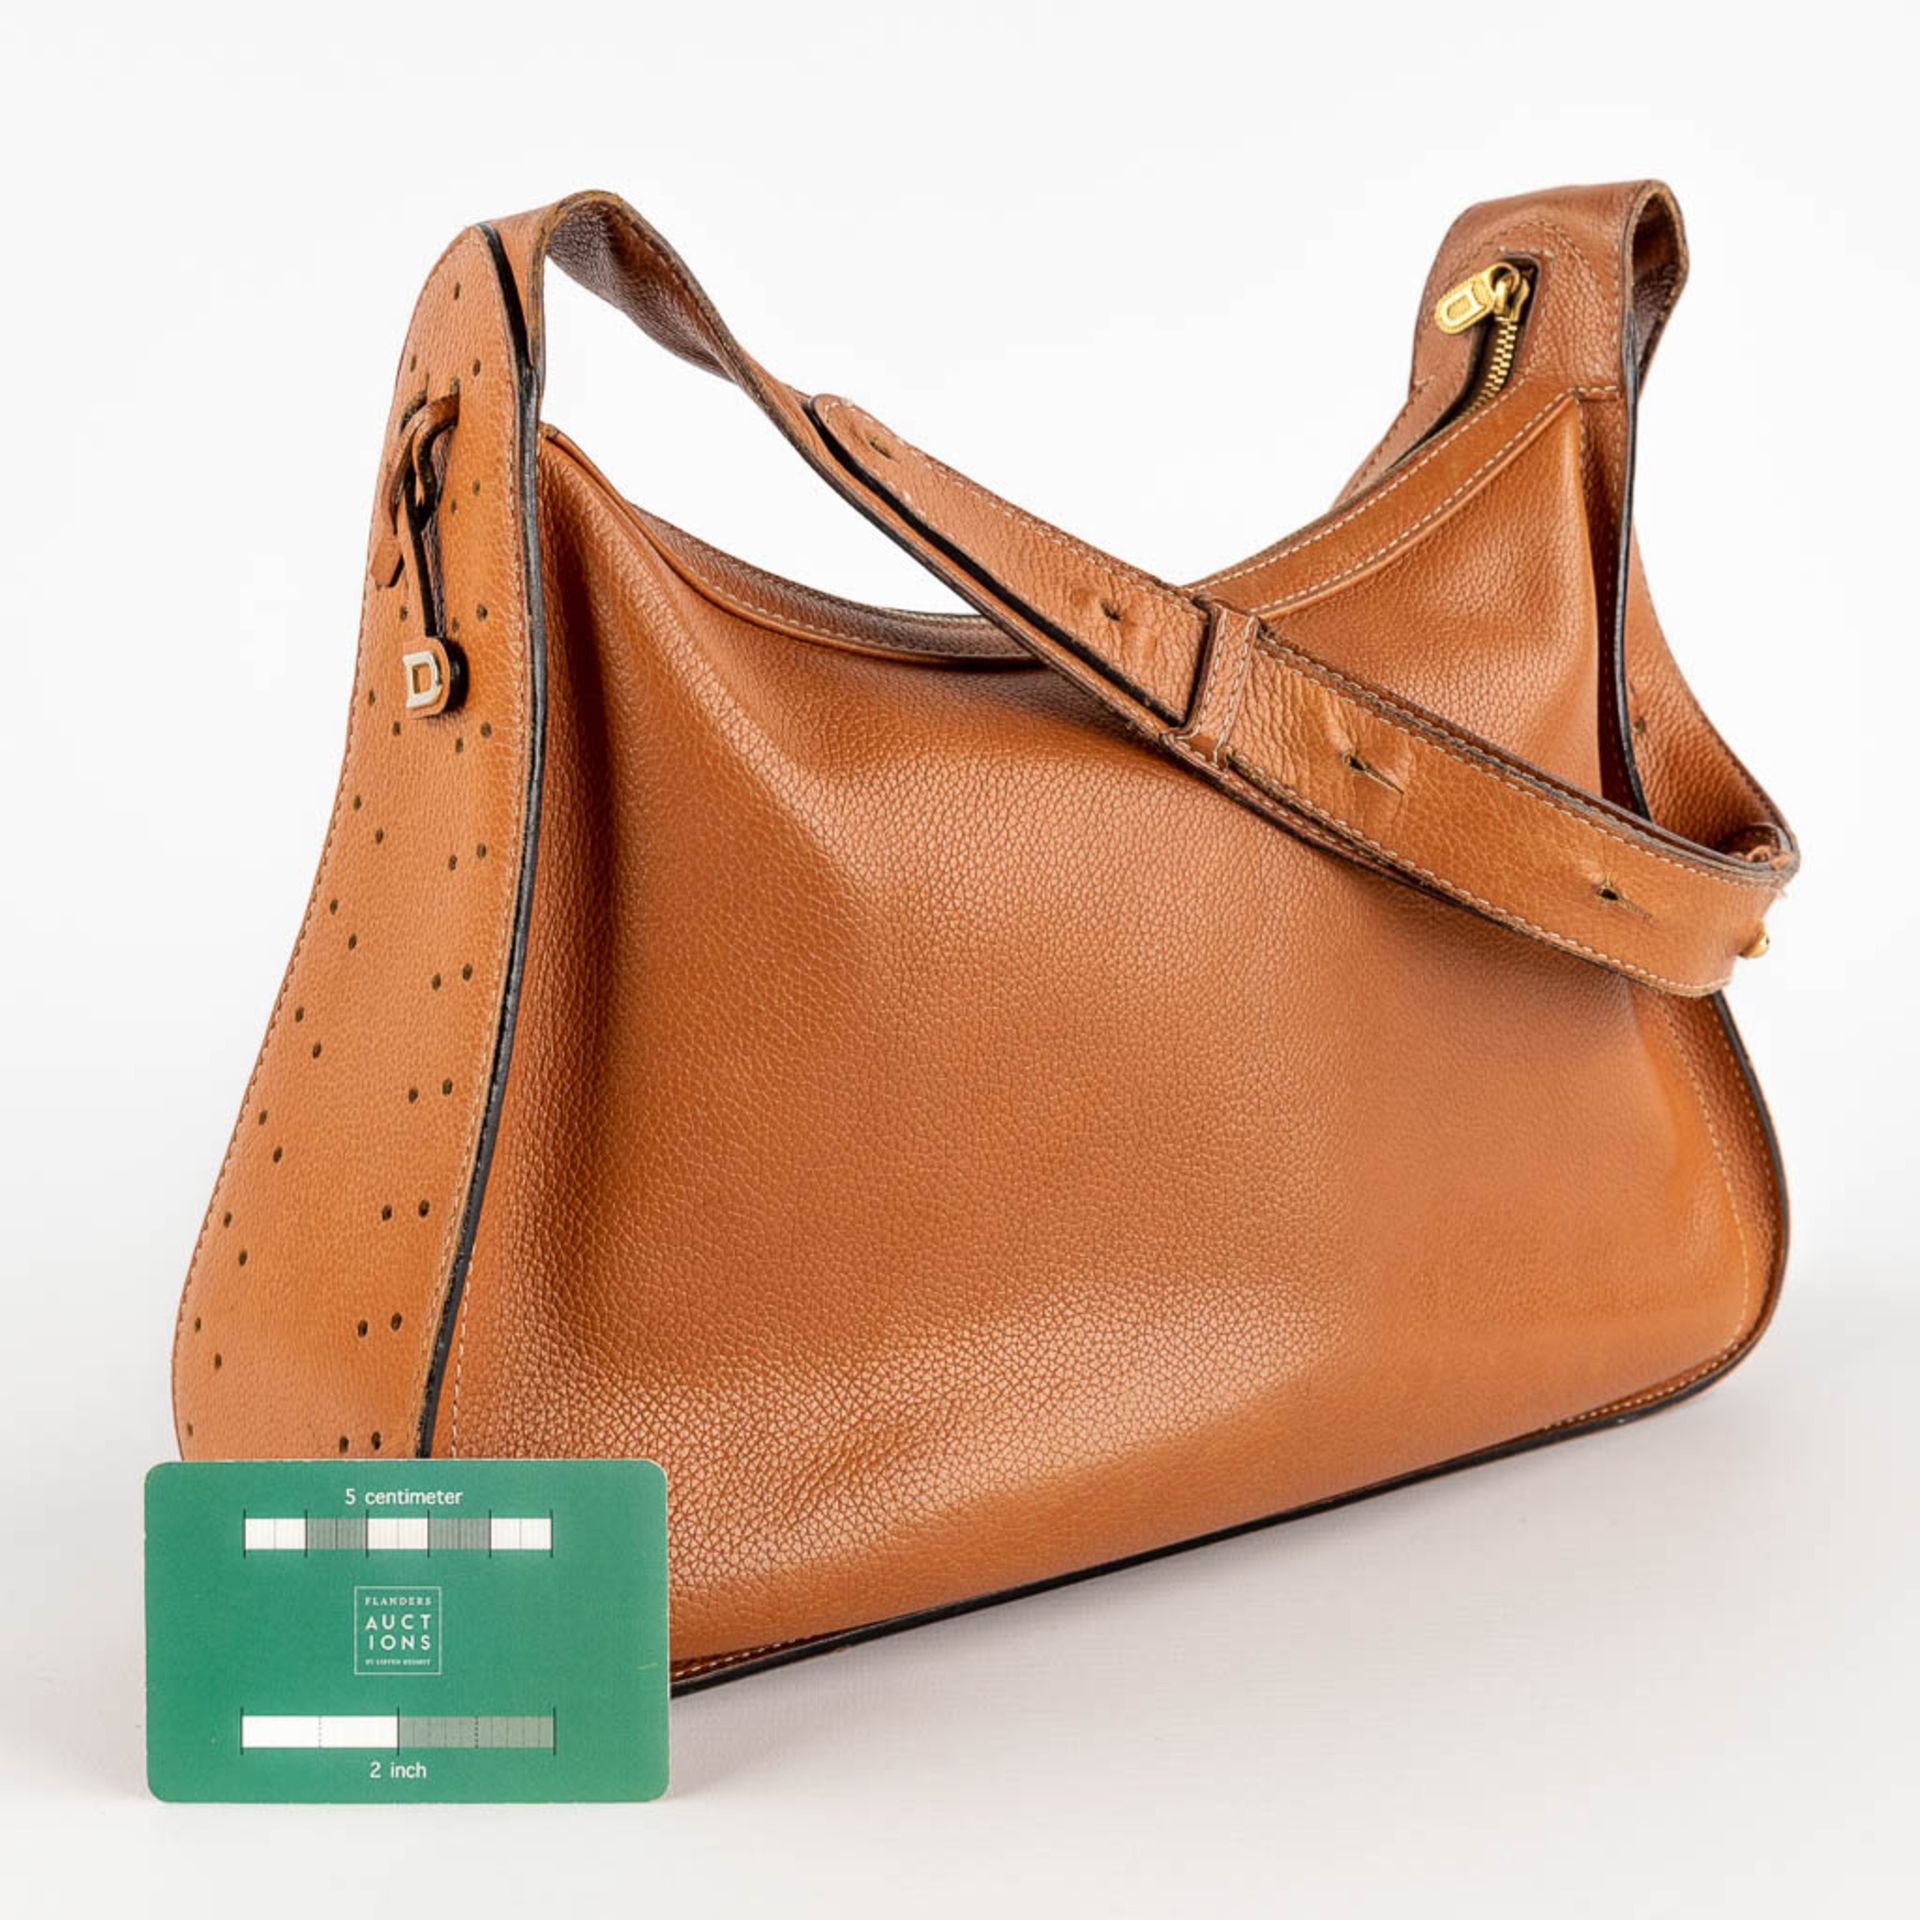 Delvaux, Pensée, a handbag made of brown leather. (W:24 x H:32 cm) - Image 3 of 18